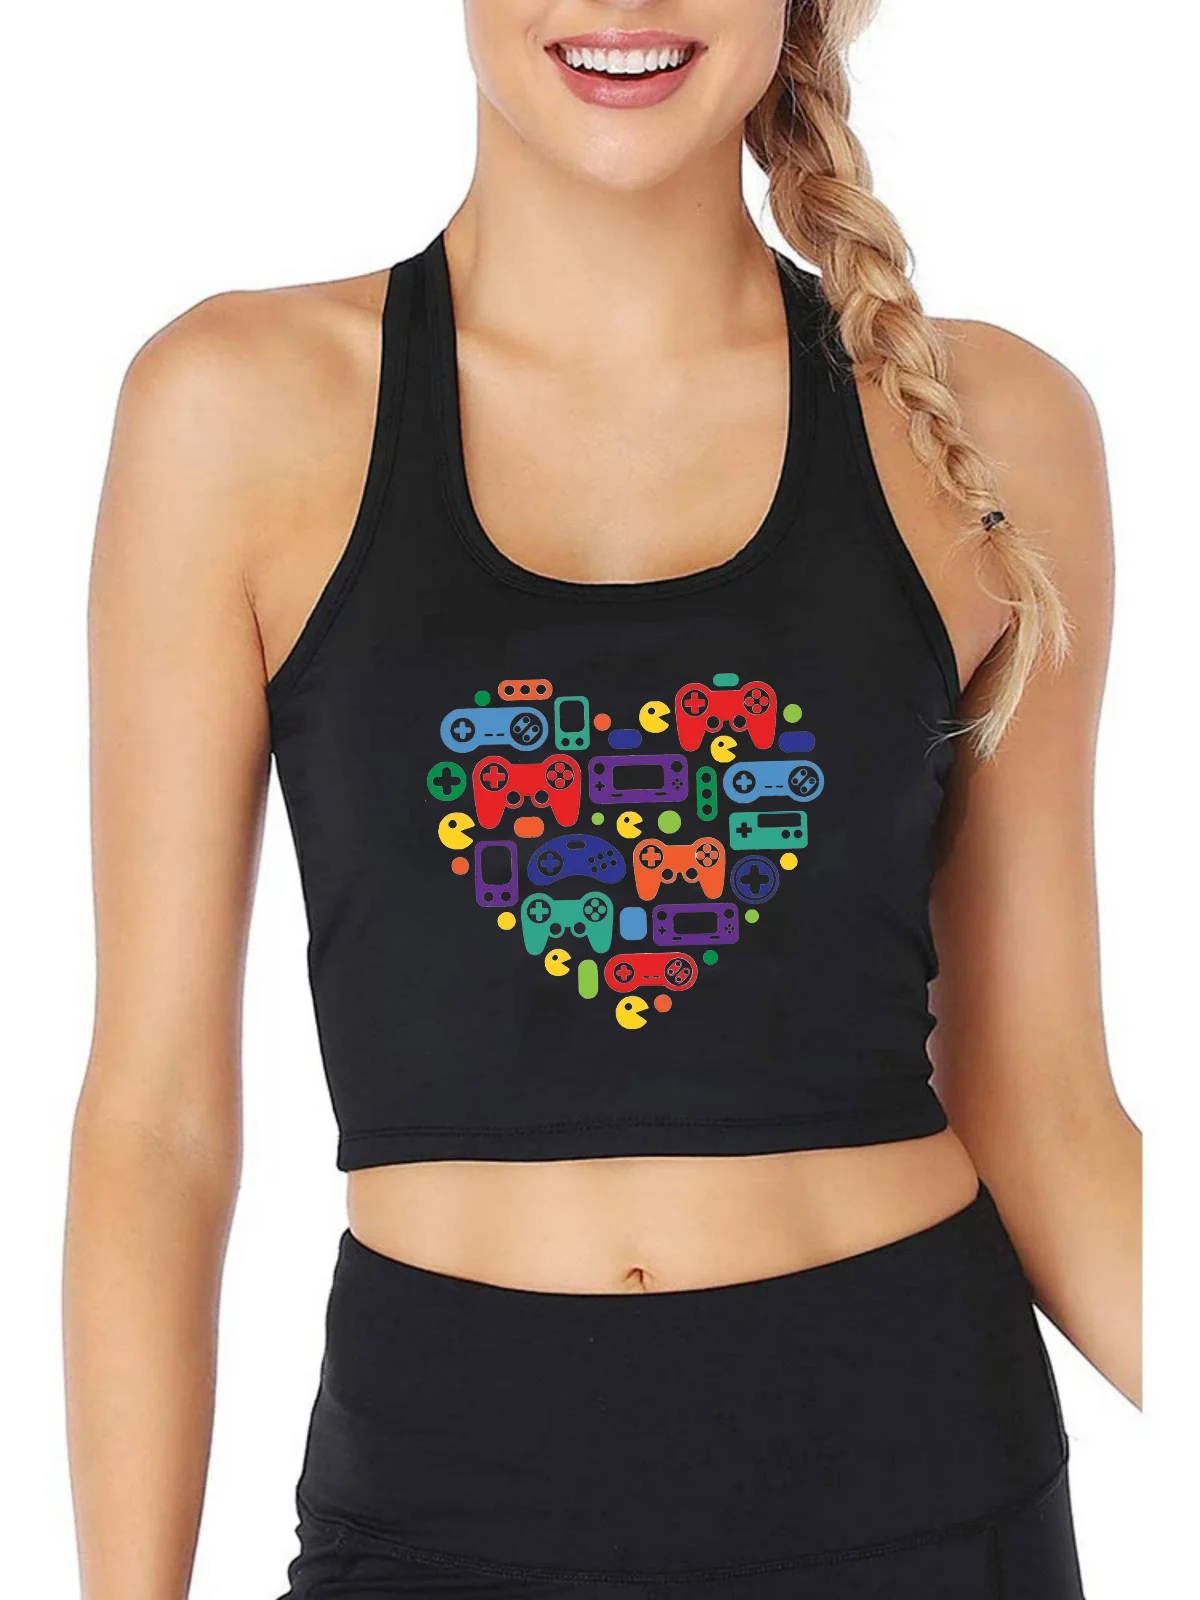 

Video Game Love Design Sexy Breathable Slim Fit Crop Top Esports Lovers Personality Customizable Tank Tops